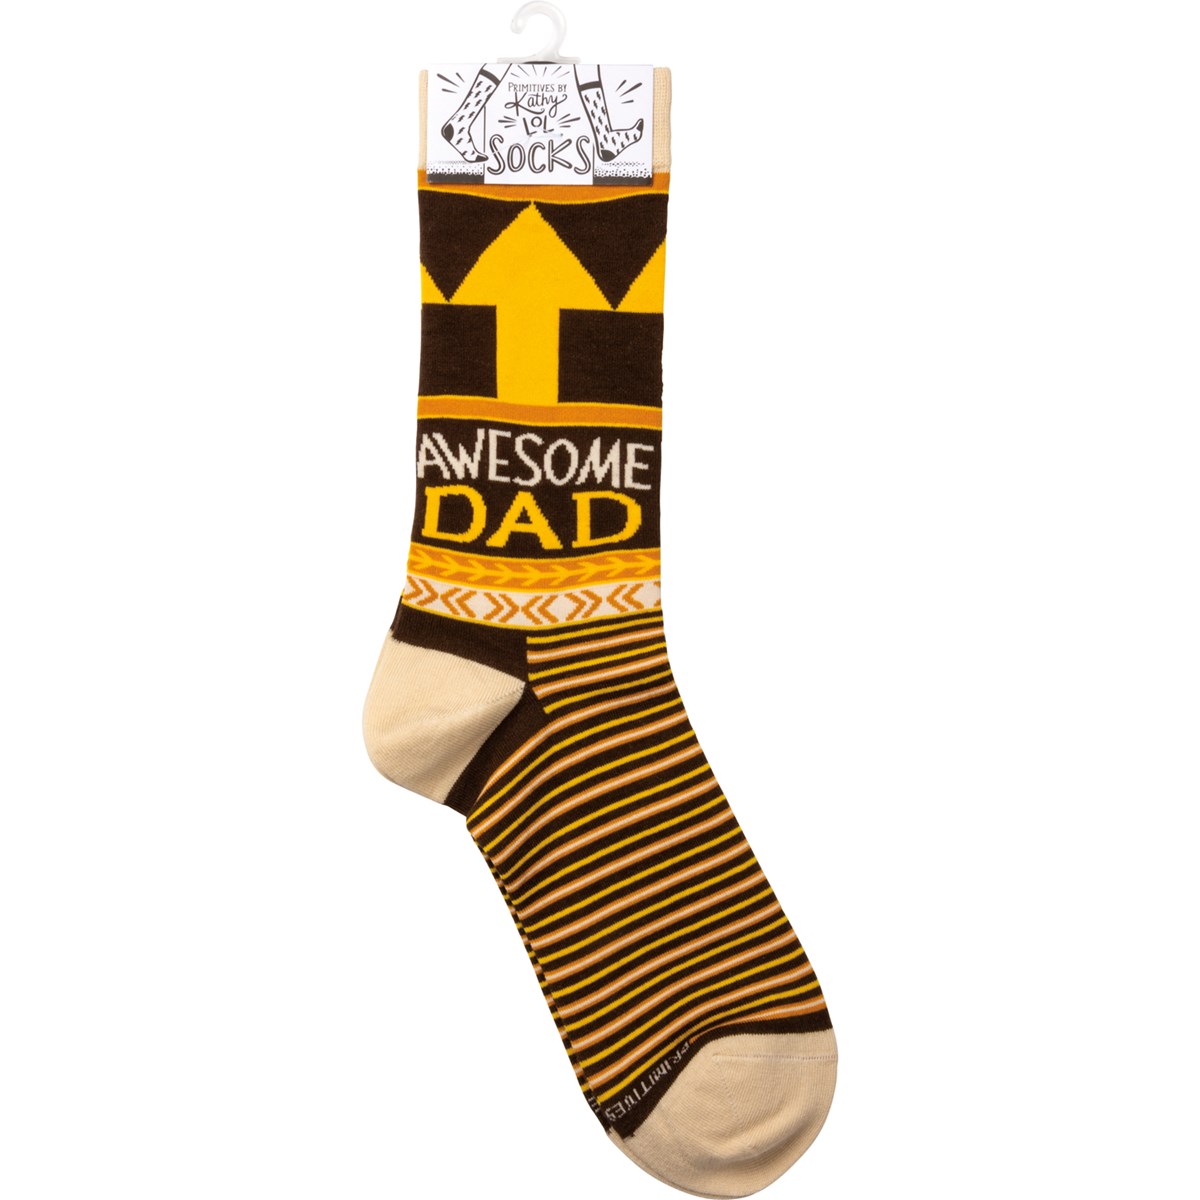 Socks - Awesome Dad - One Size Fits Most - Cotton, Nylon, Spandex